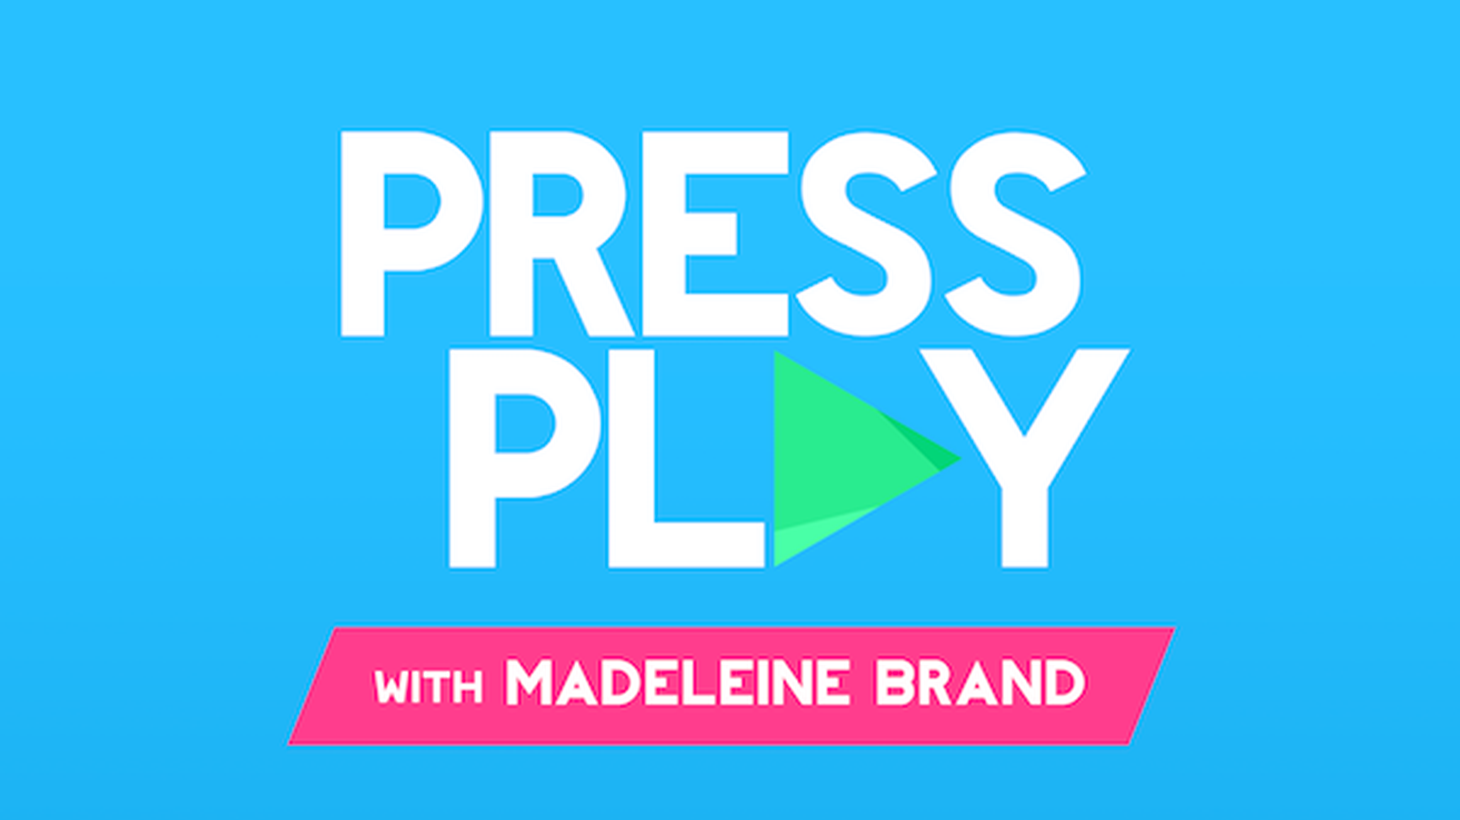 Today on Press Play, we look at the state of community colleges, especially in California, and we discuss the growing student debt crisis. We also talk to a New Yorker writer who offers an in-depth dissection of Vice President Joe Biden’s time in the White House.